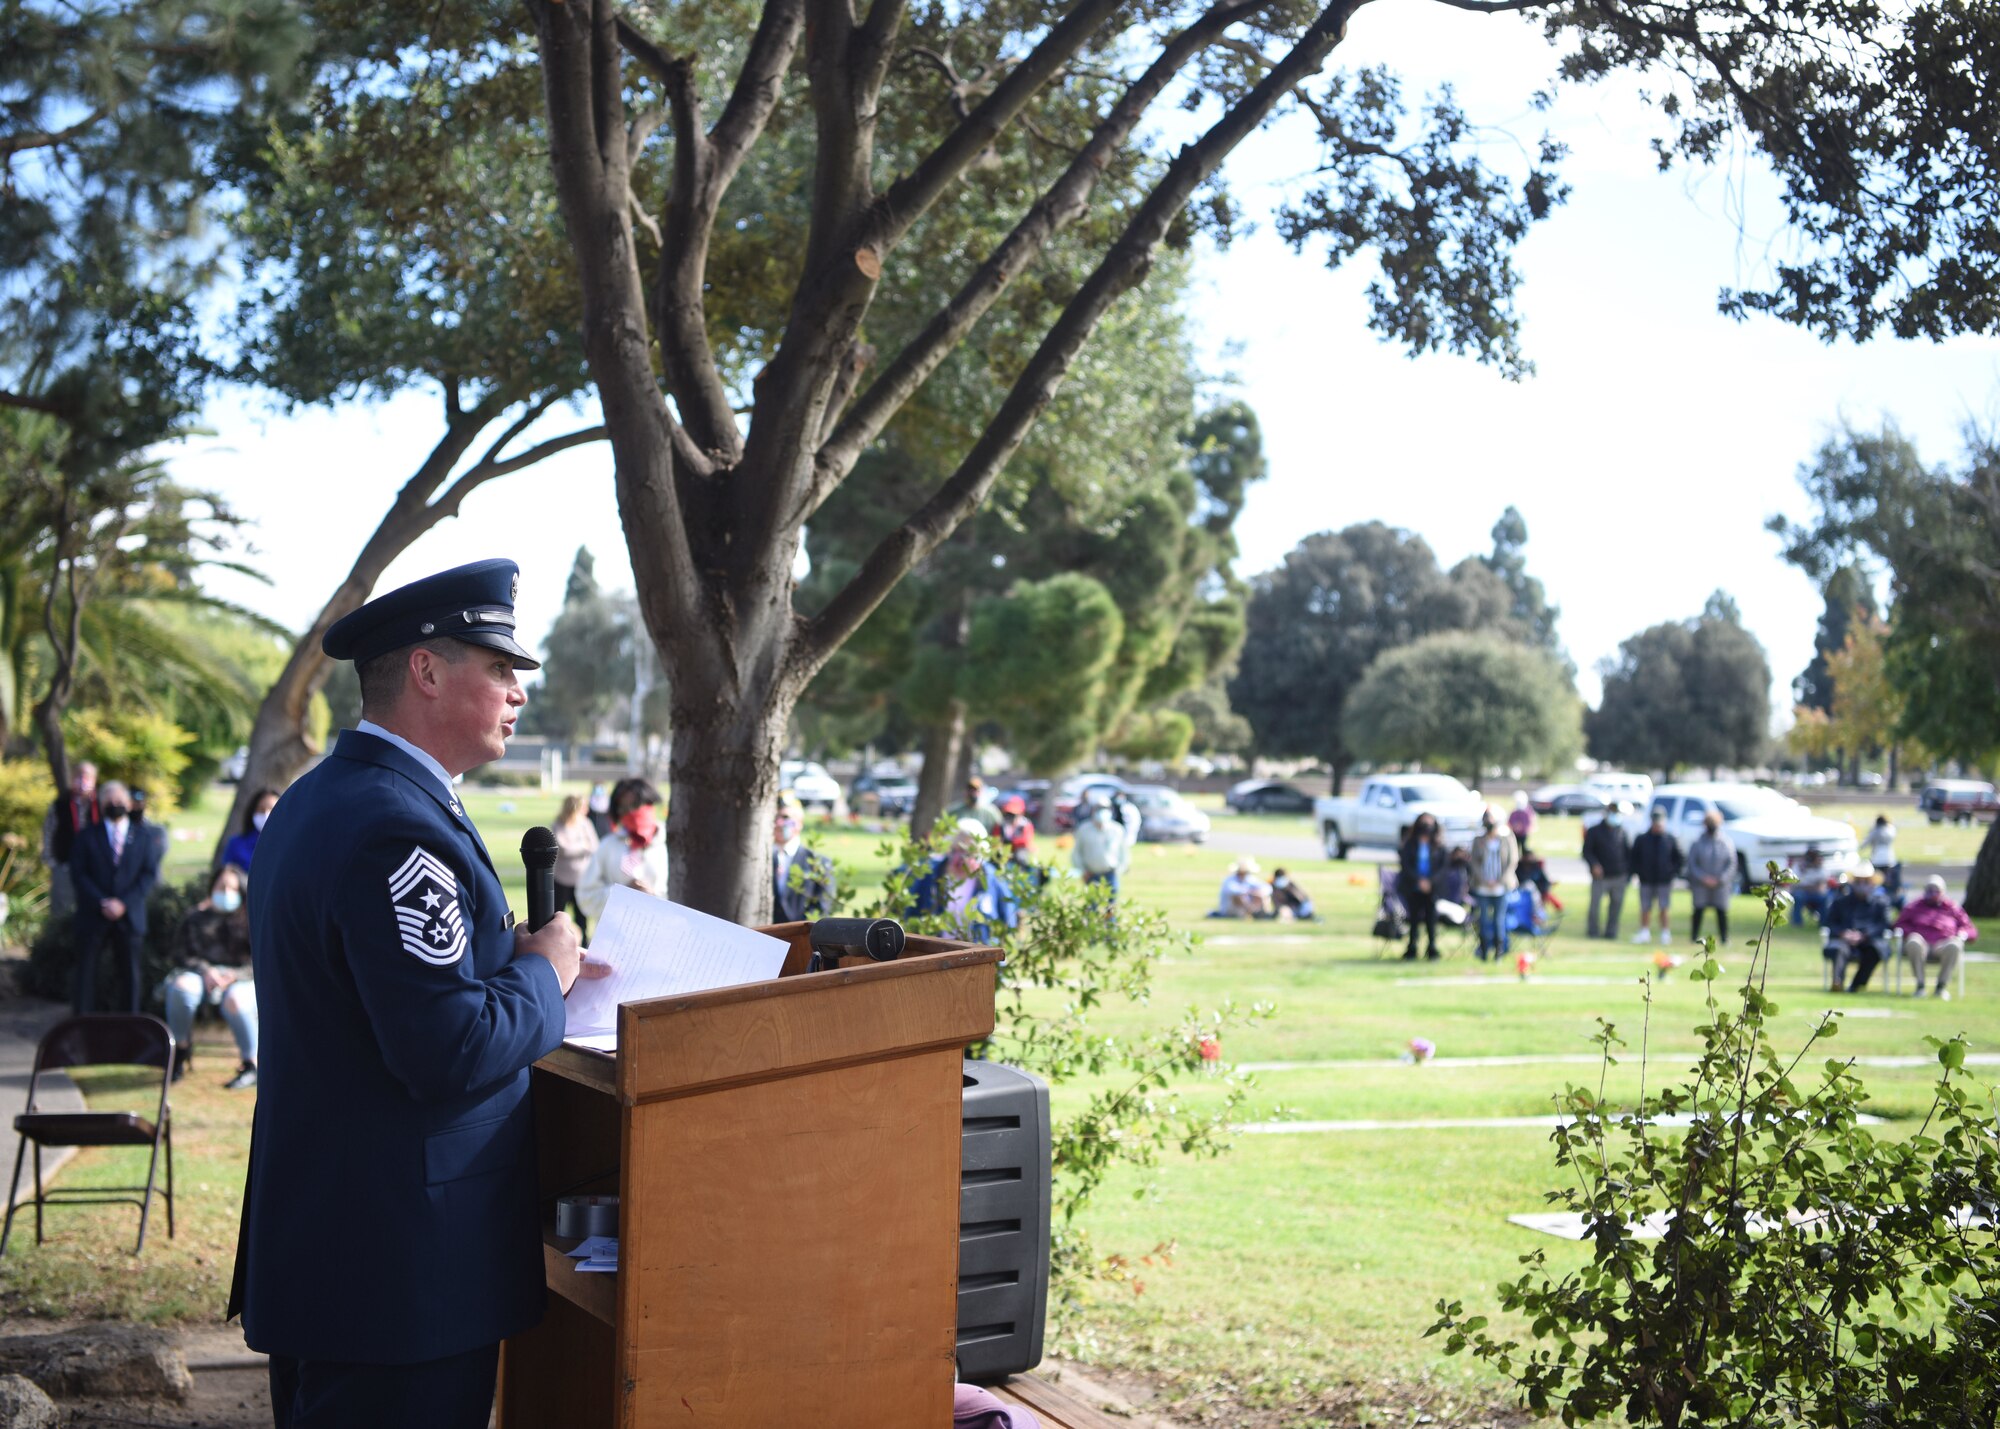 Chief Master Sgt. Jason Delucy, 30th Space Wing command chief, speaks during a Veterans Day ceremony Nov. 11, 2020, in Santa Maria, Calif. Originally recognized as Armistice Day, this day marked the end of World War I and was formally celebrated on the 11th hour of the 11th day of the 11th month in 1918. Today, we celebrate this day as Veterans Day to honor past and present members who have served in the military, with the original tie of November 11th. (U.S. Space Force photo by Senior Airman Hanah Abercrombie)